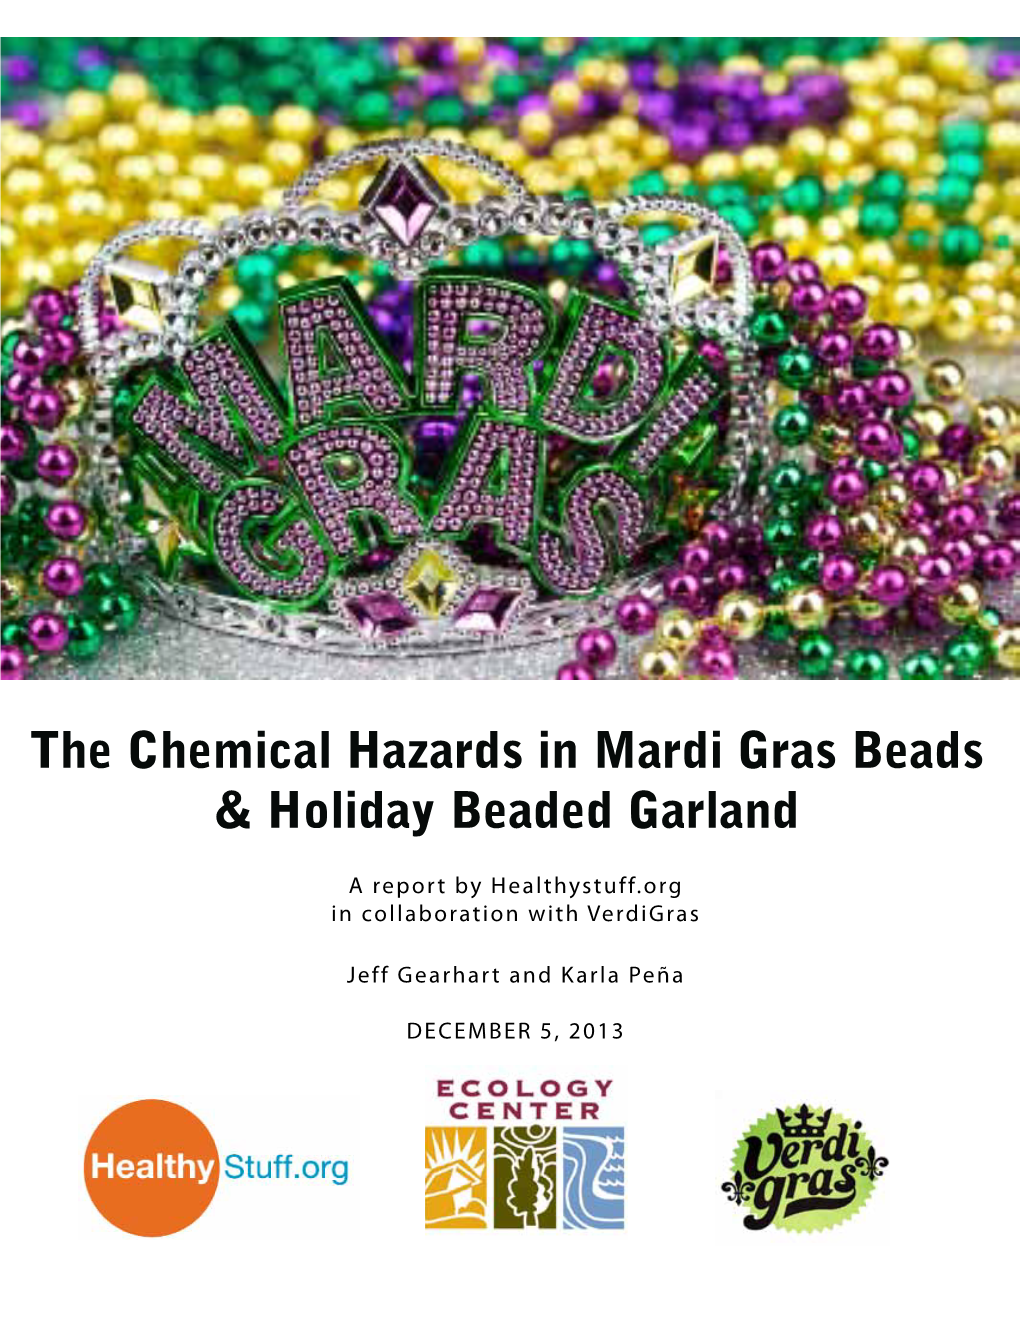 The Chemical Hazards in Mardi Gras Beads & Holiday Beaded Garland